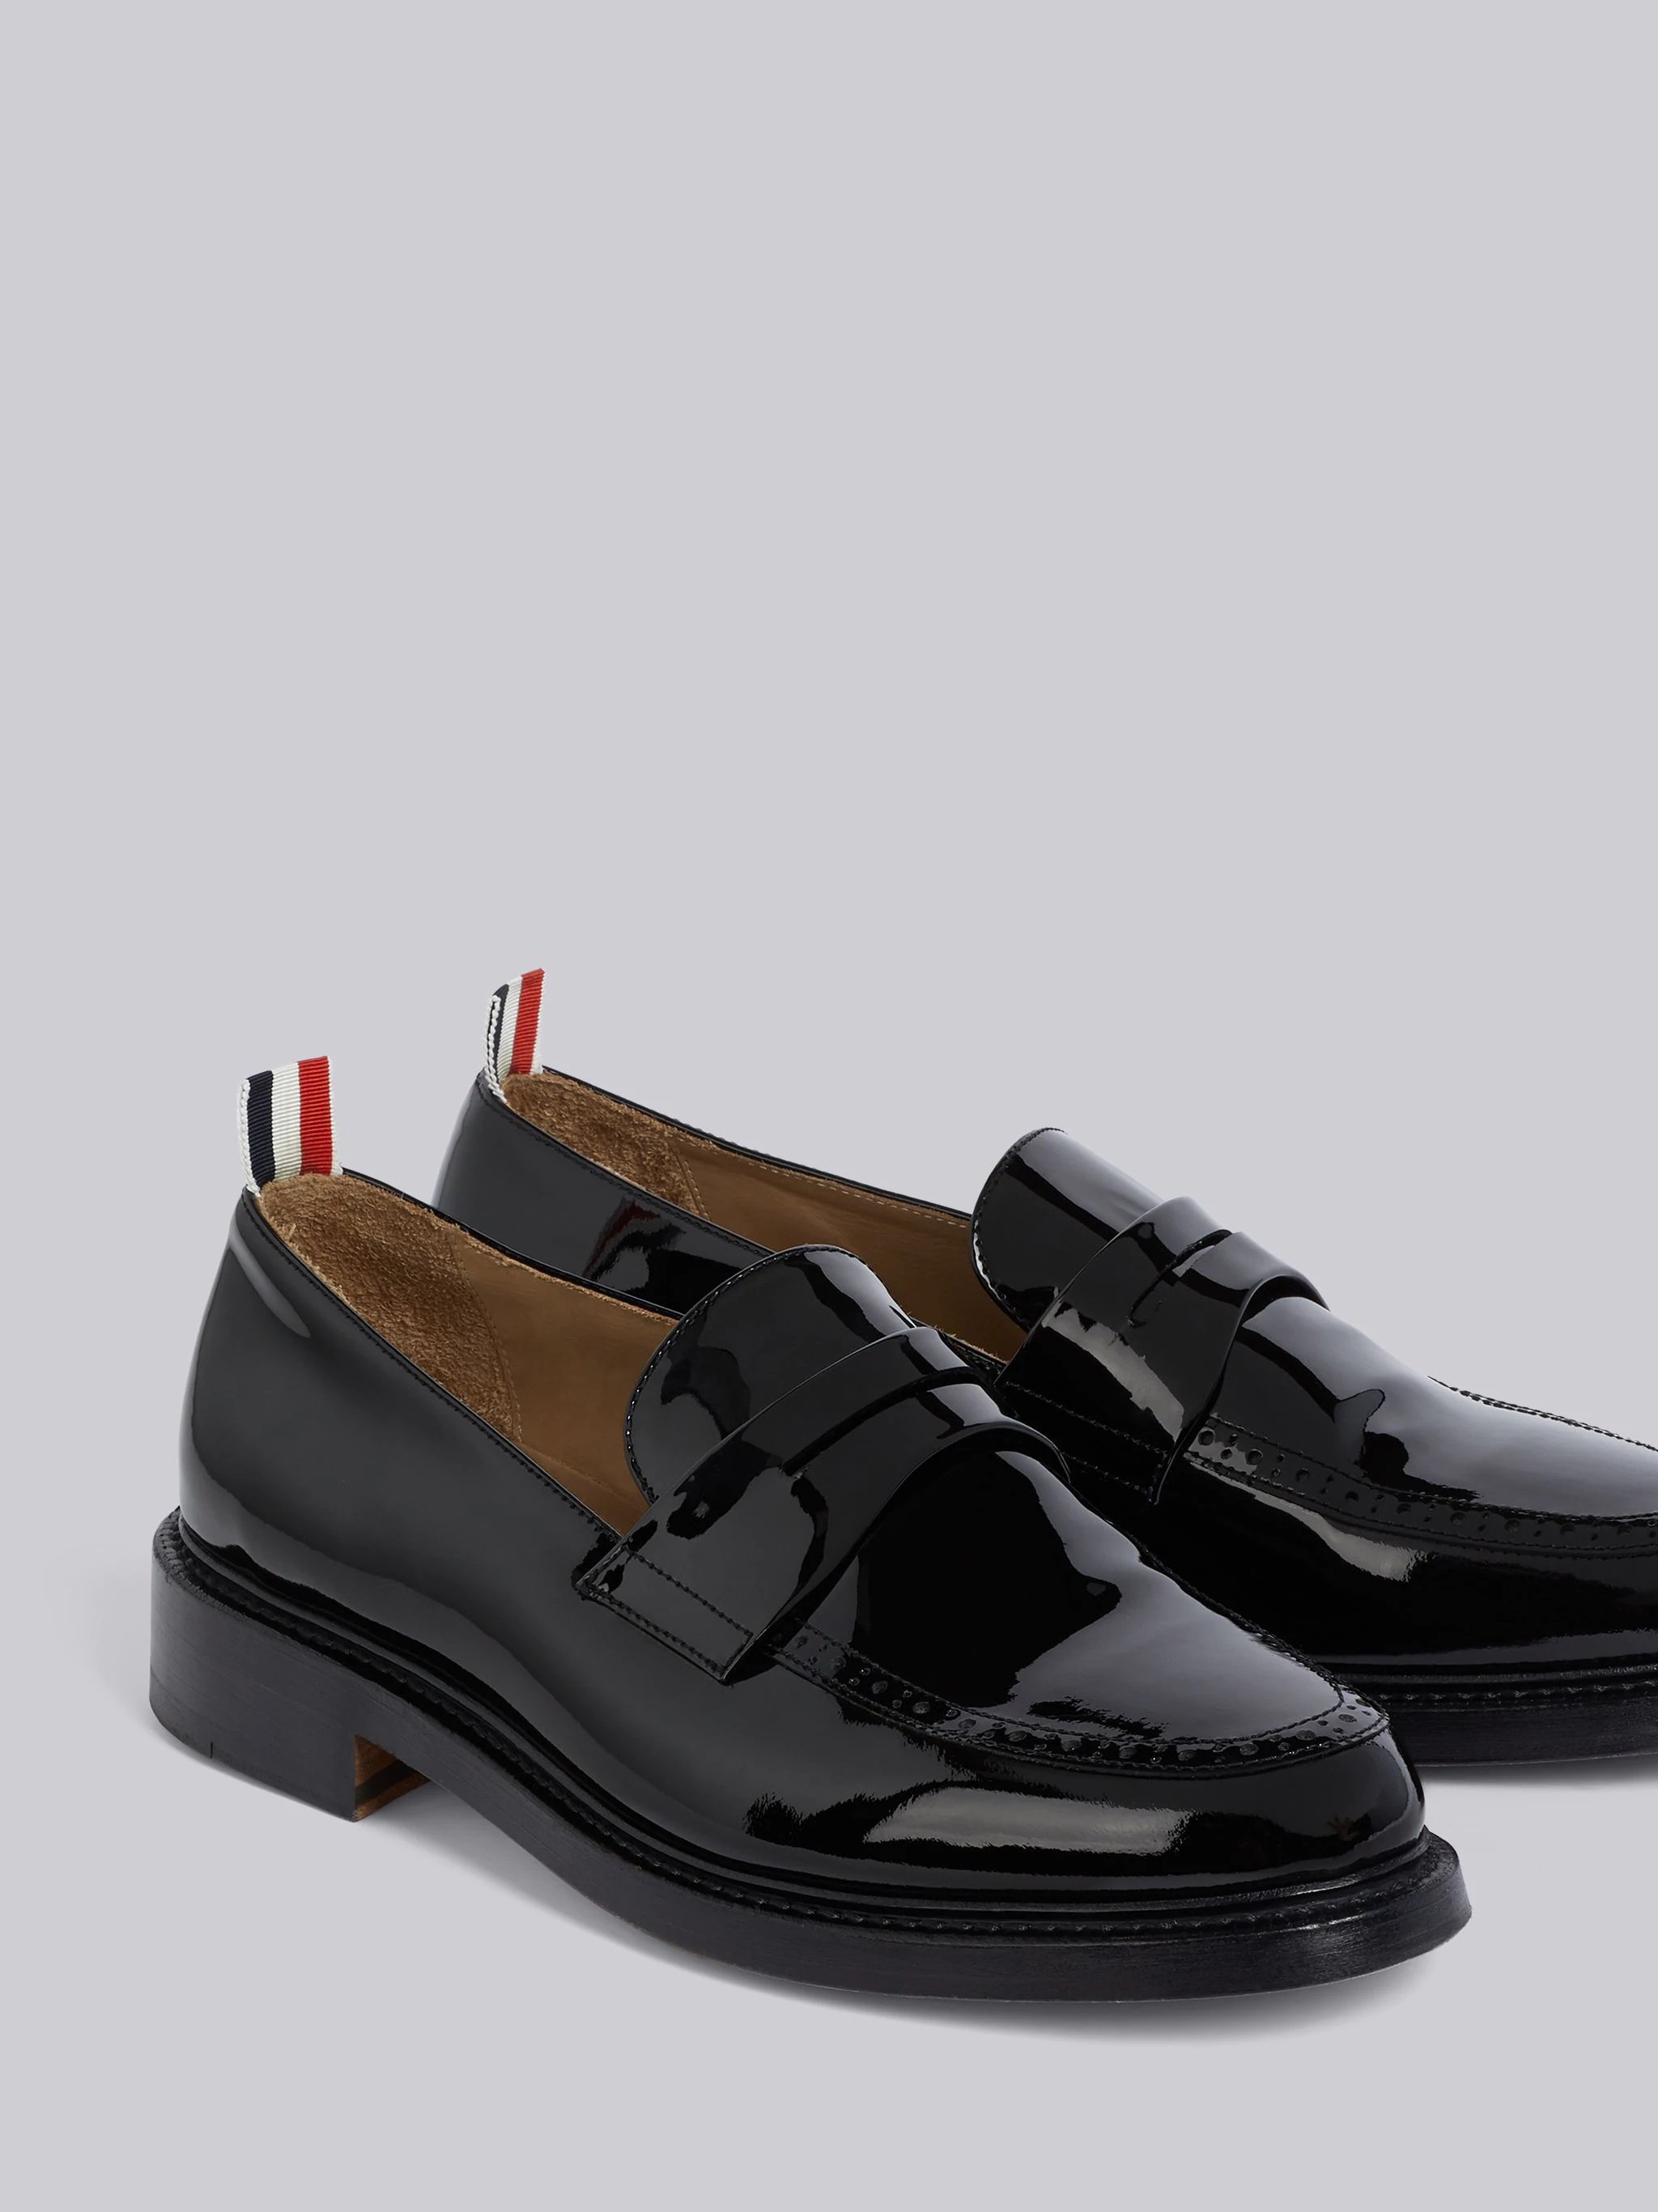 Black Patent Leather Penny Loafer - 2